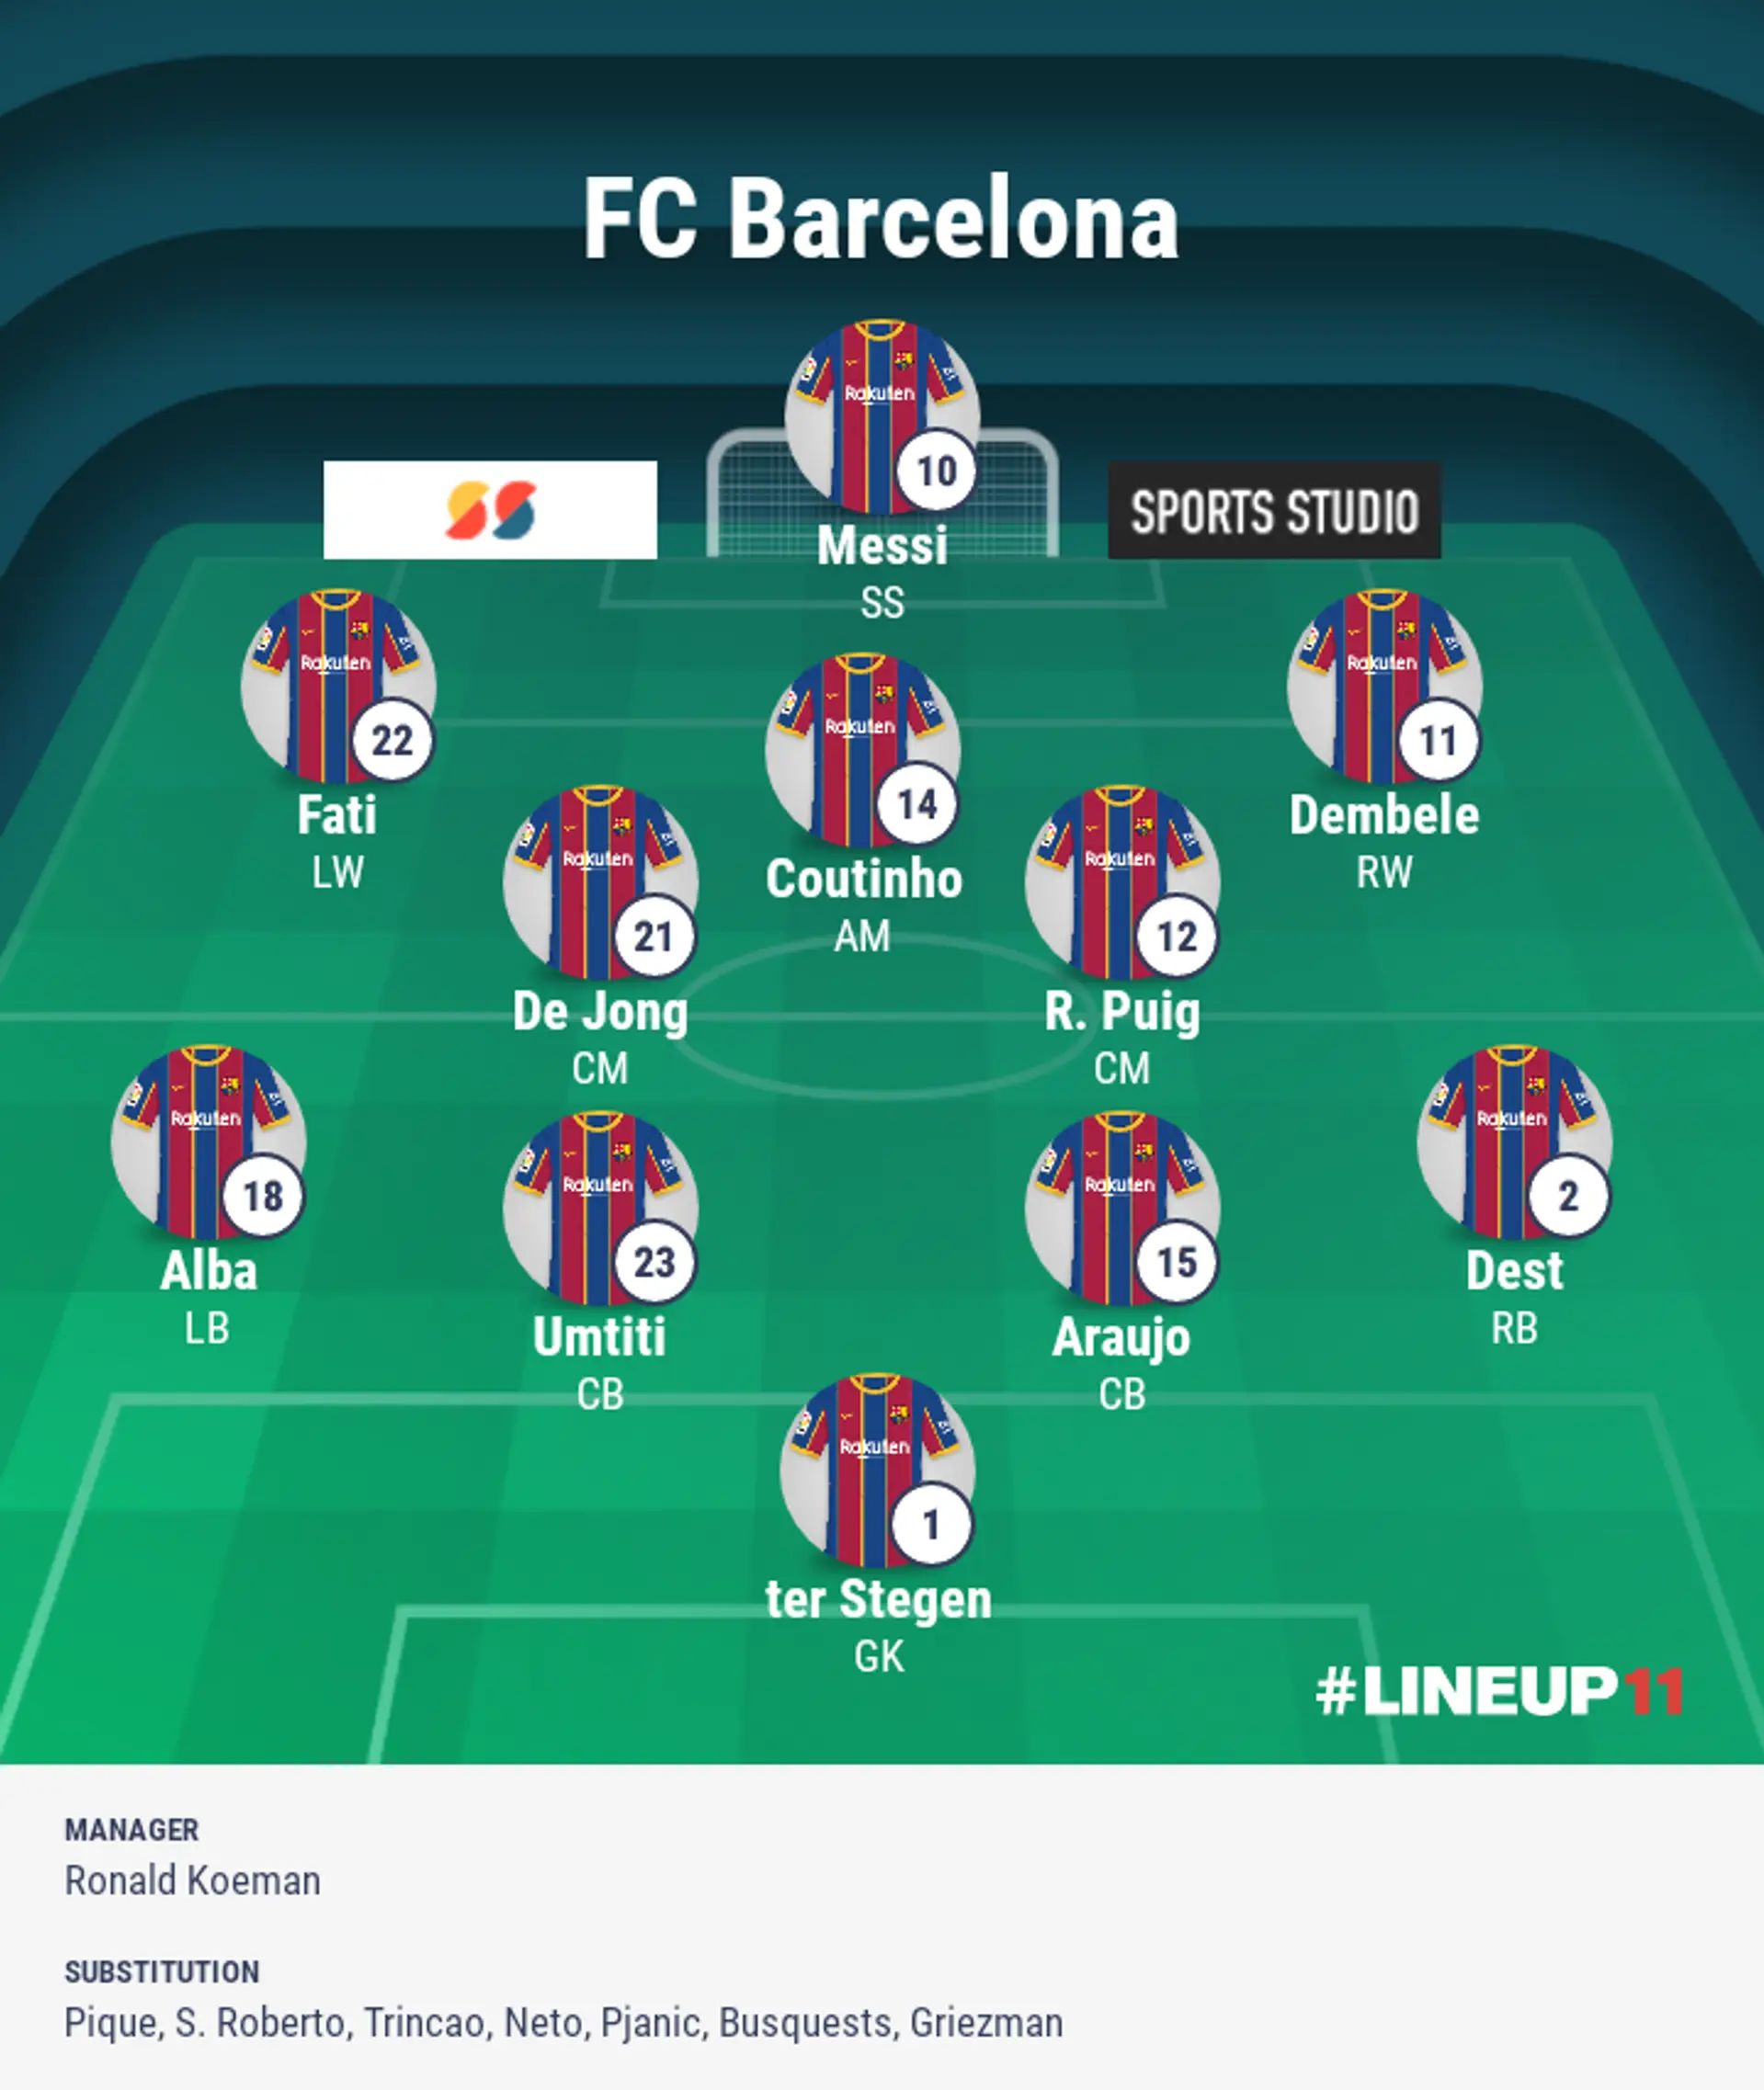 Barca's ideal starting line-up (... assuming there are no injuries)